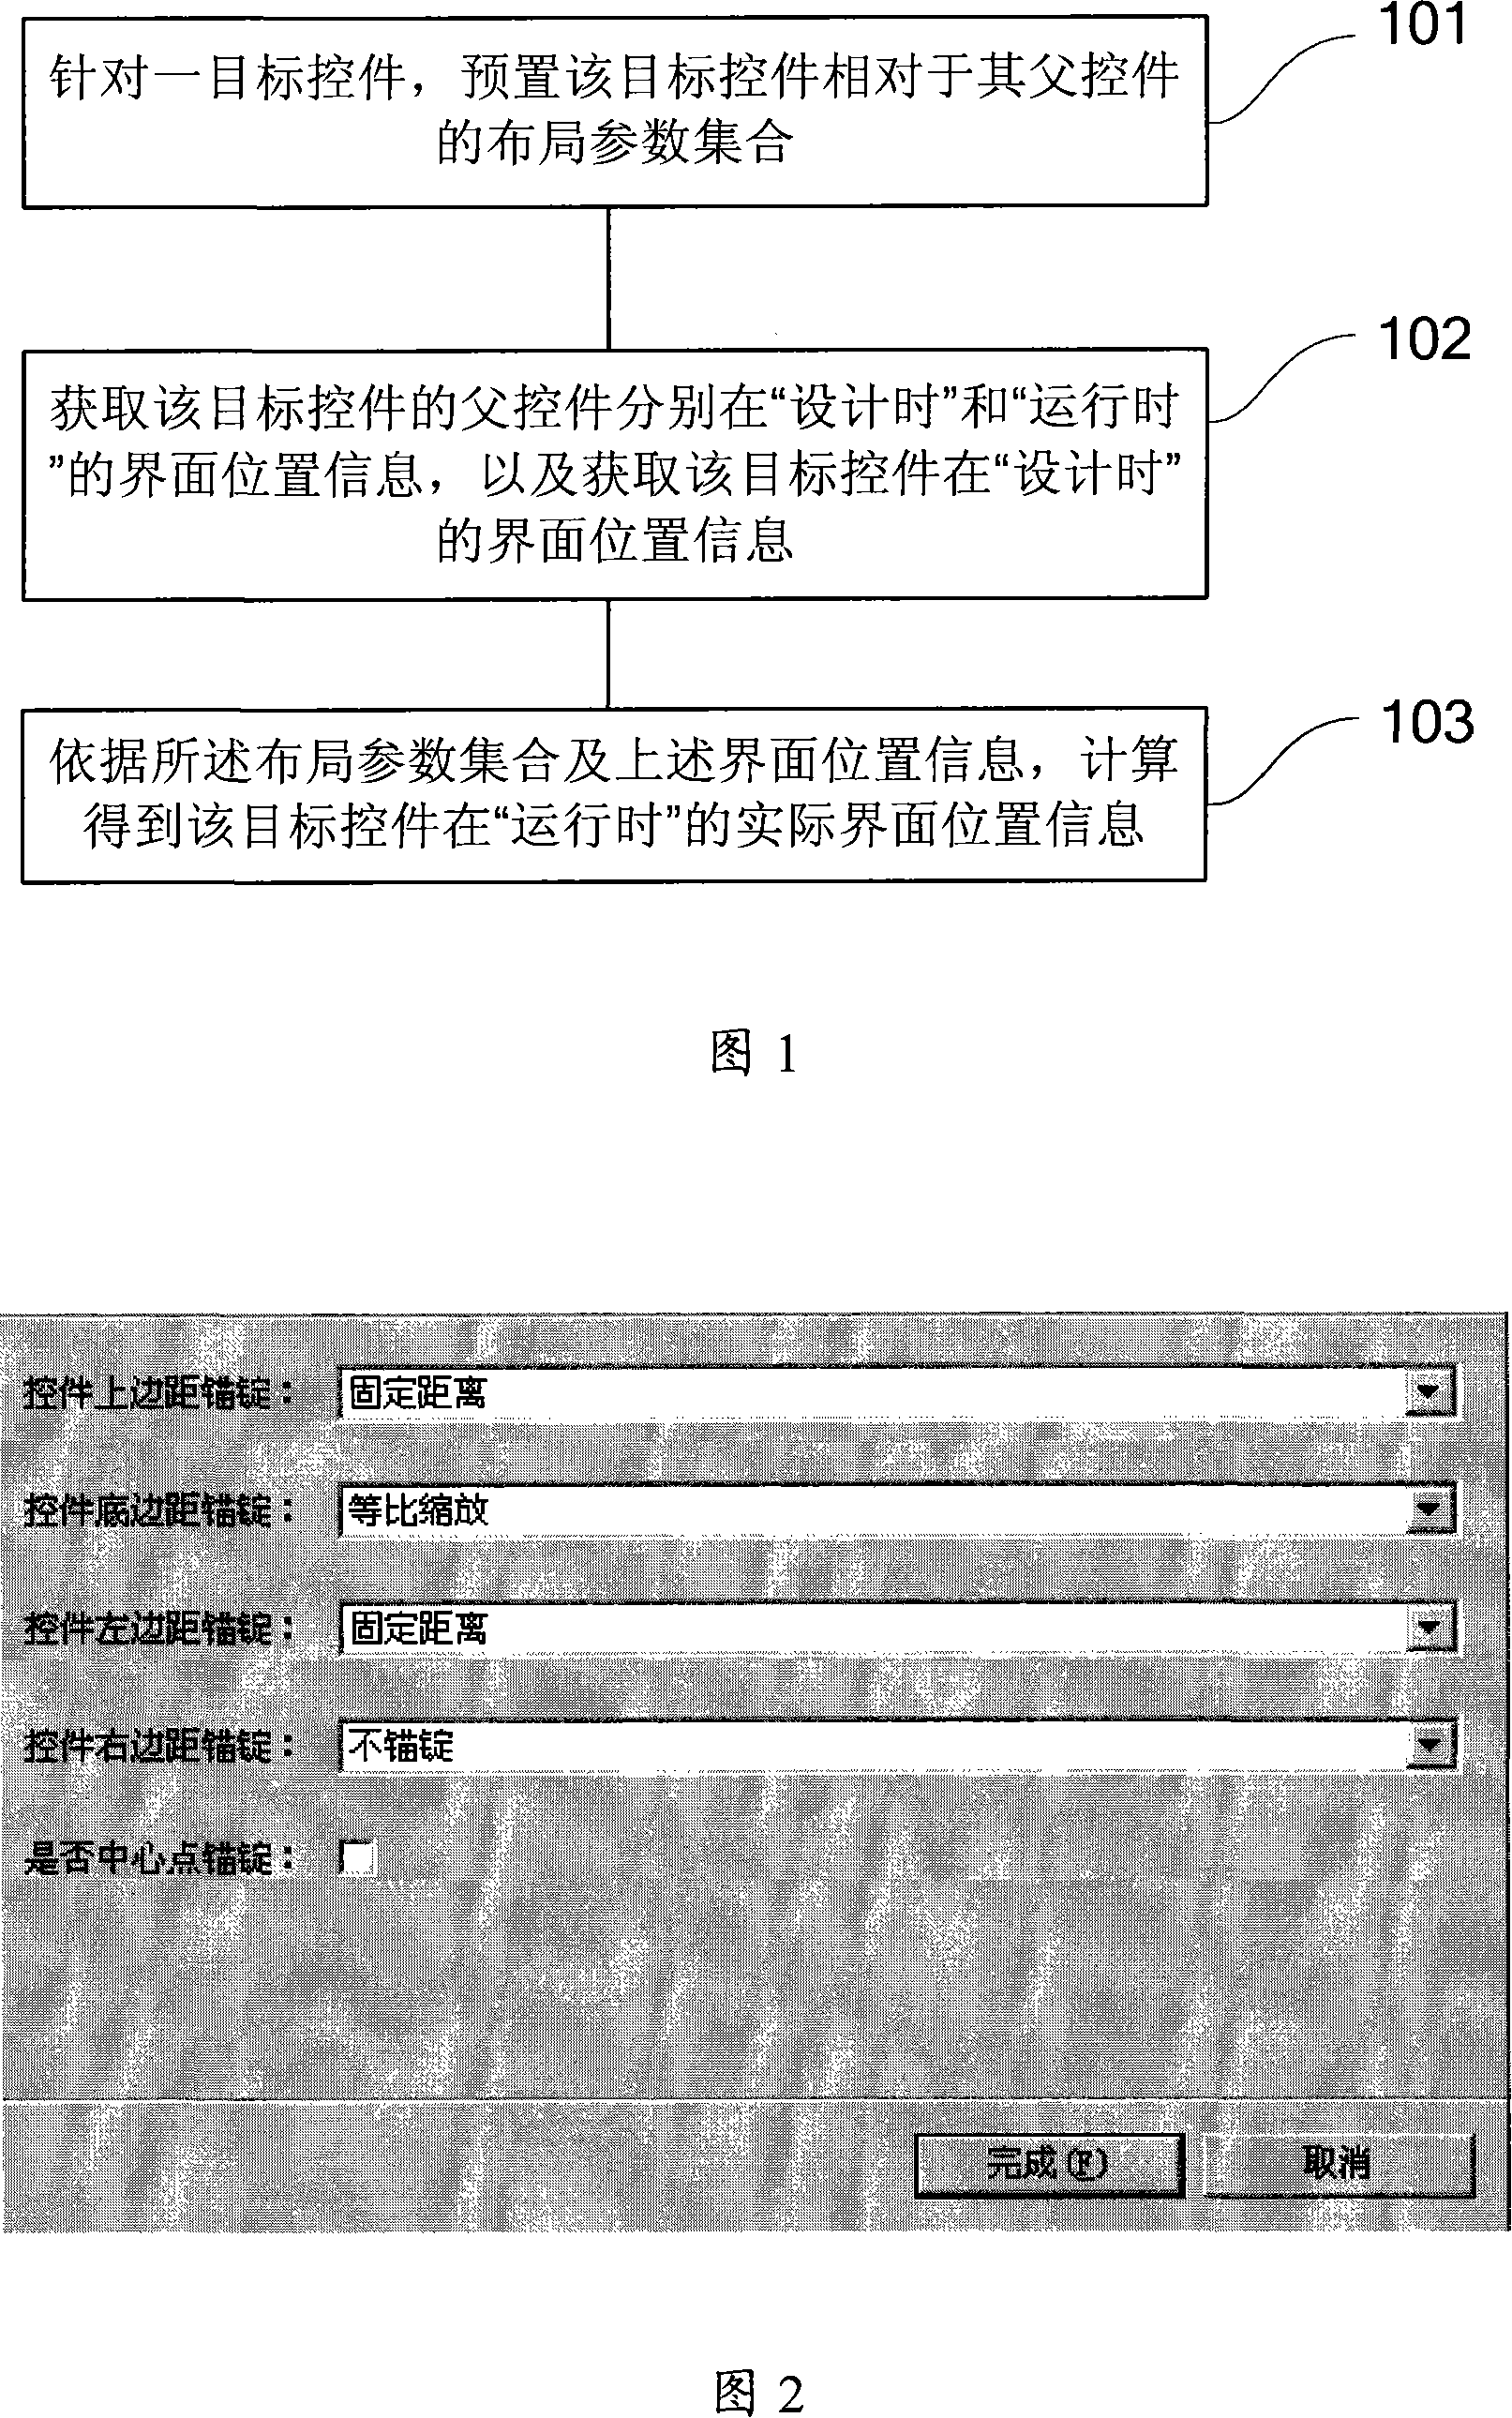 Method and system for dynamic laying-out interface element